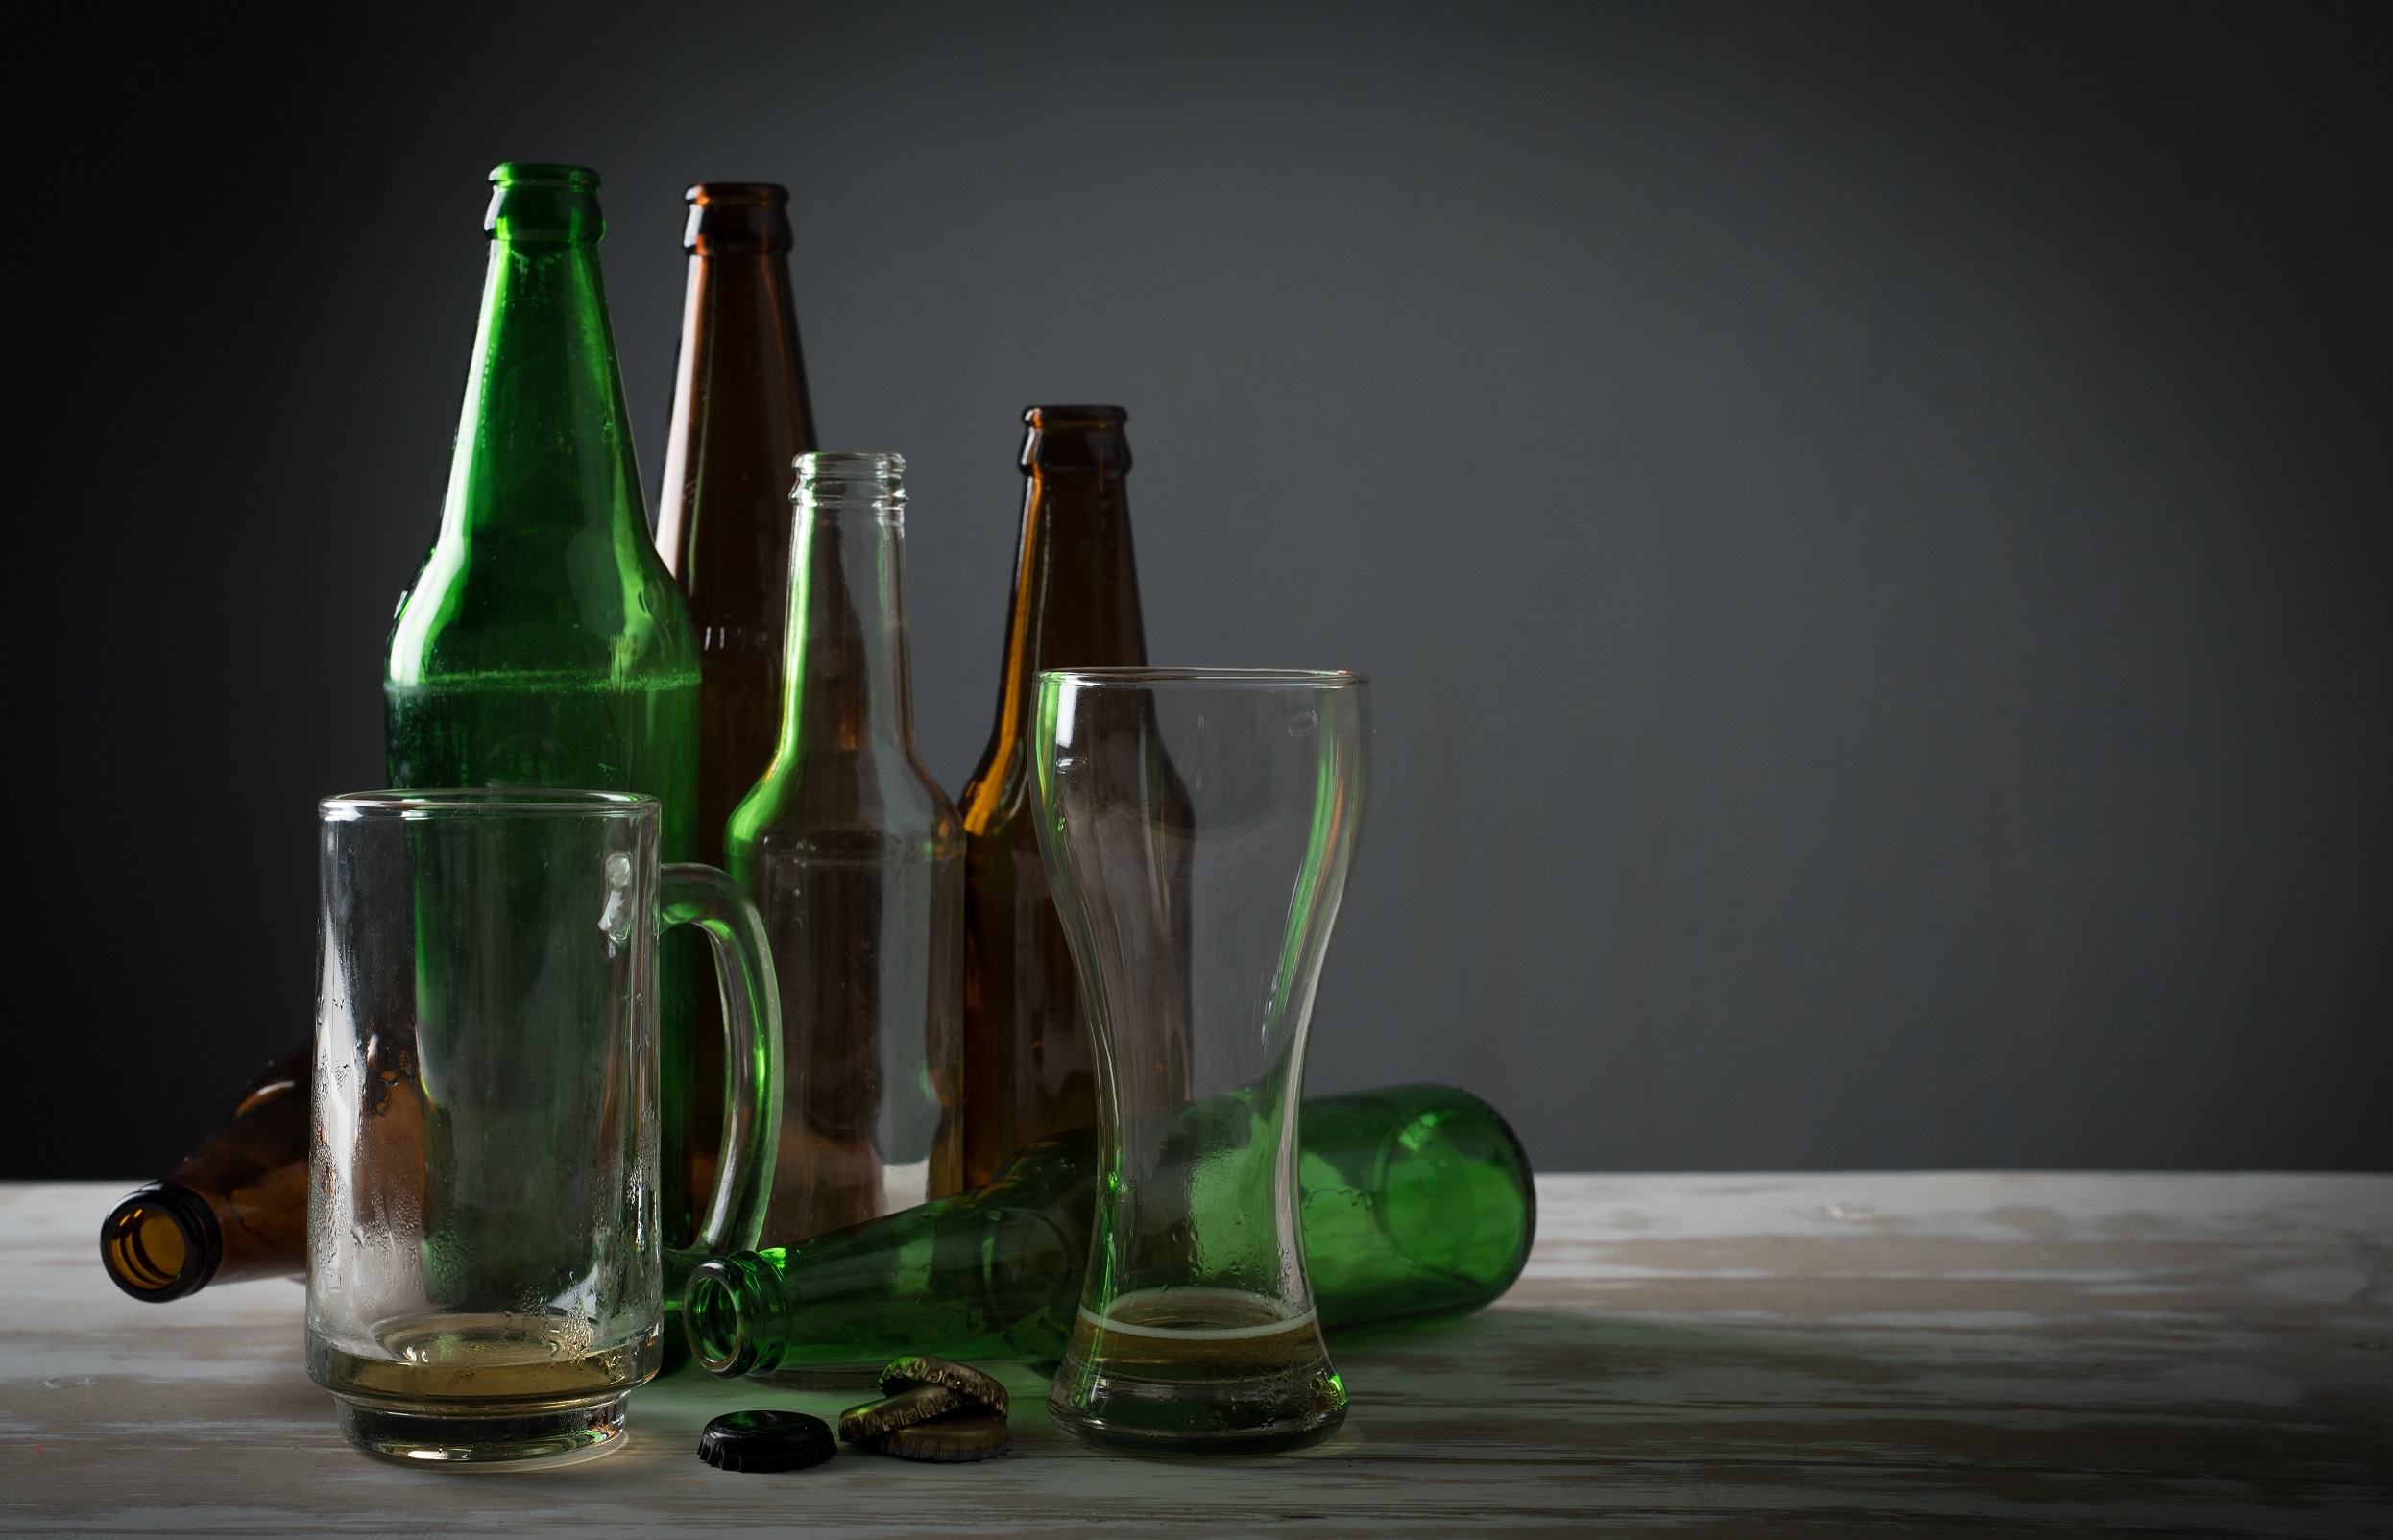 Recognize alcohol abuse and associated health risks